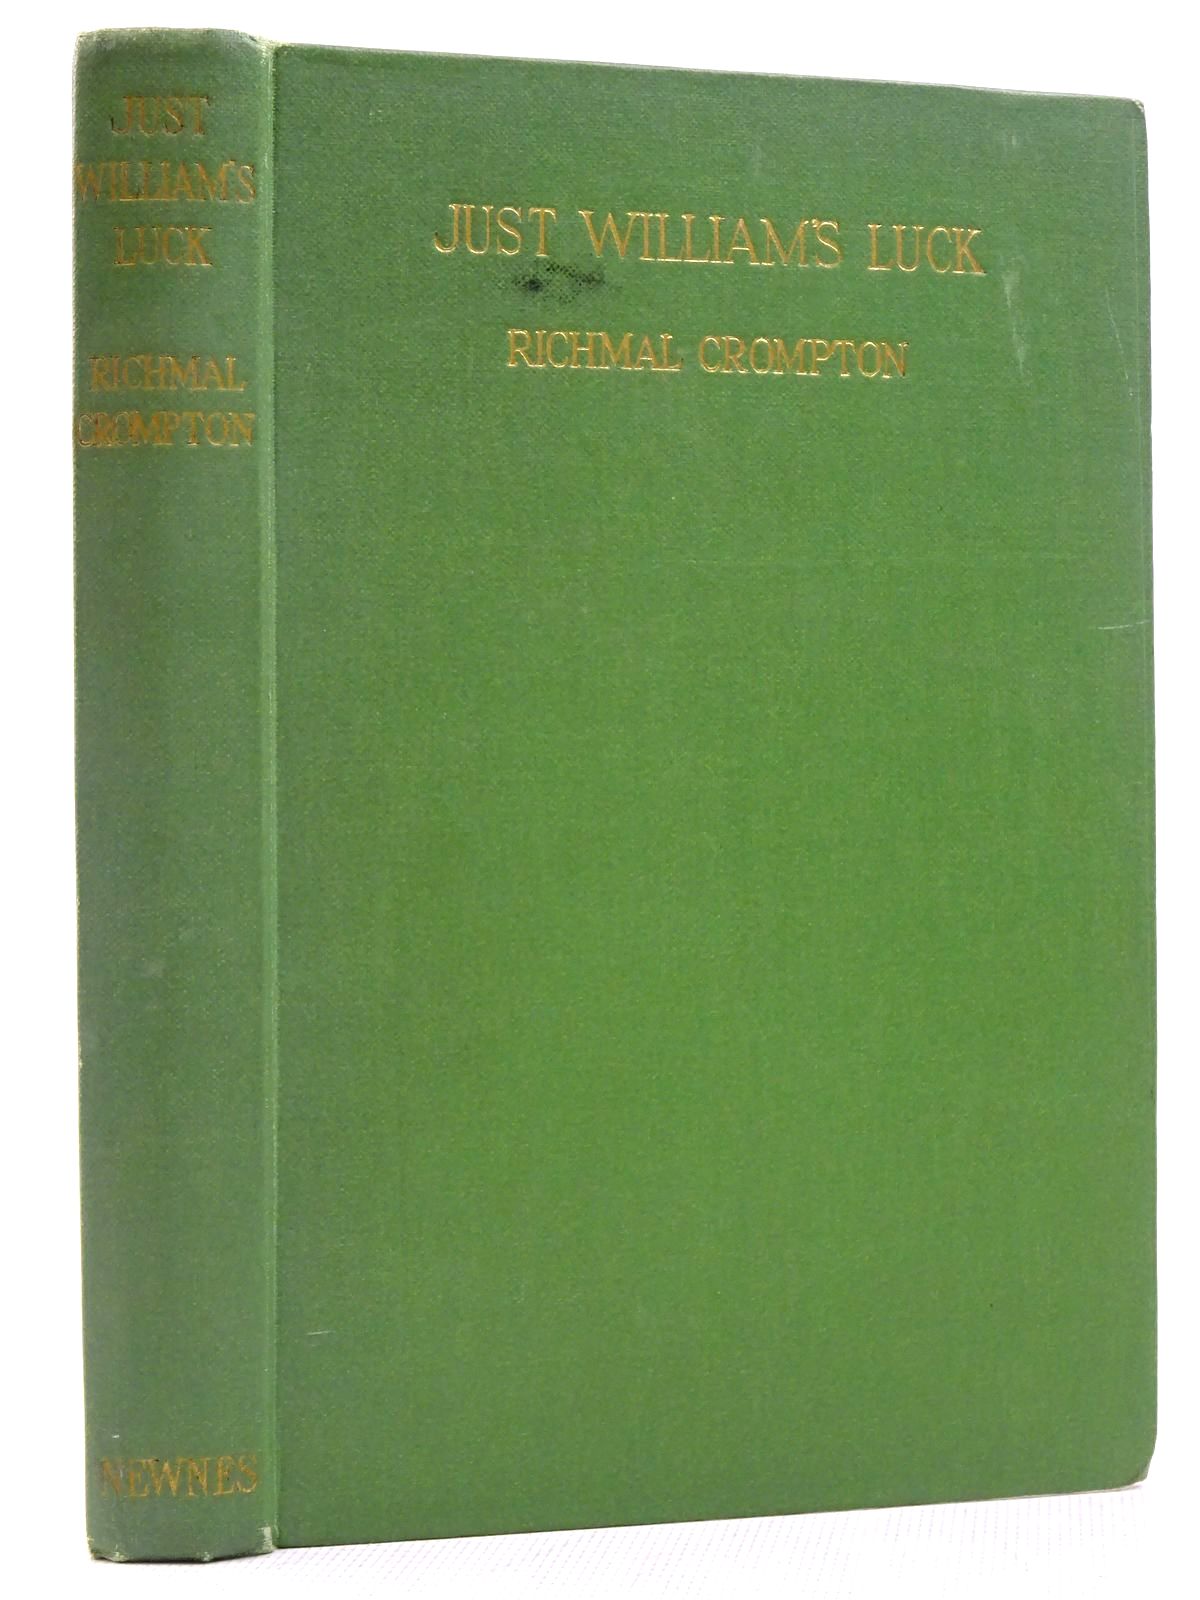 Photo of JUST WILLIAM'S LUCK written by Crompton, Richmal illustrated by Henry, Thomas published by George Newnes Ltd. (STOCK CODE: 2128981)  for sale by Stella & Rose's Books